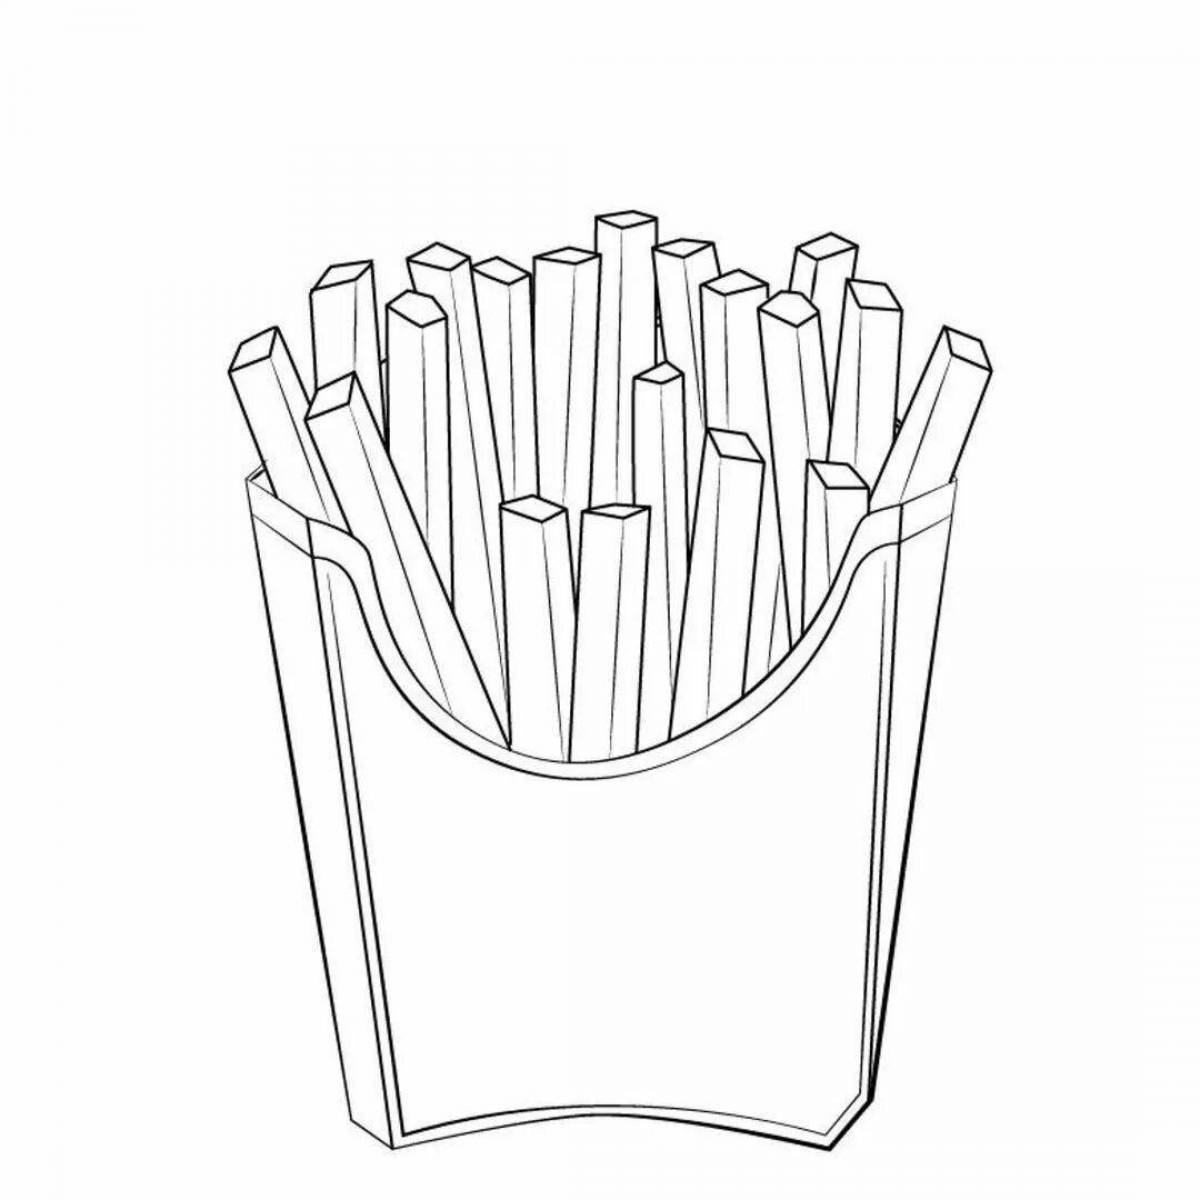 French fries fun coloring book for kids